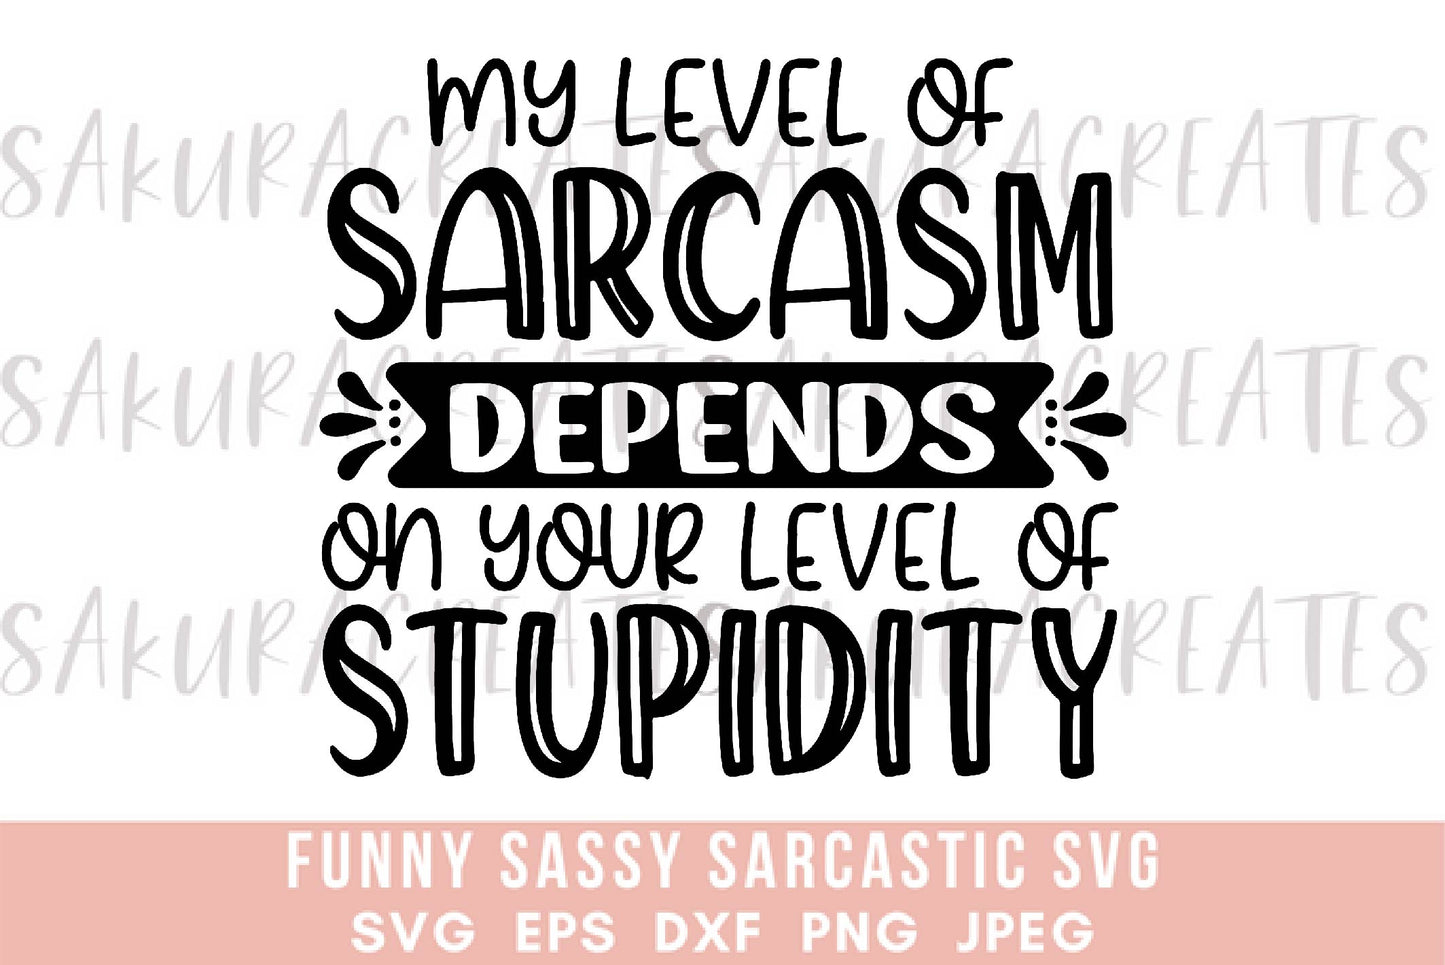 My level of sarcasm depends on your level of stupidity SVG DXF EPS PNG JPEG SVG cut file silhouette cricut funny sarcastic sassy quotes sayings